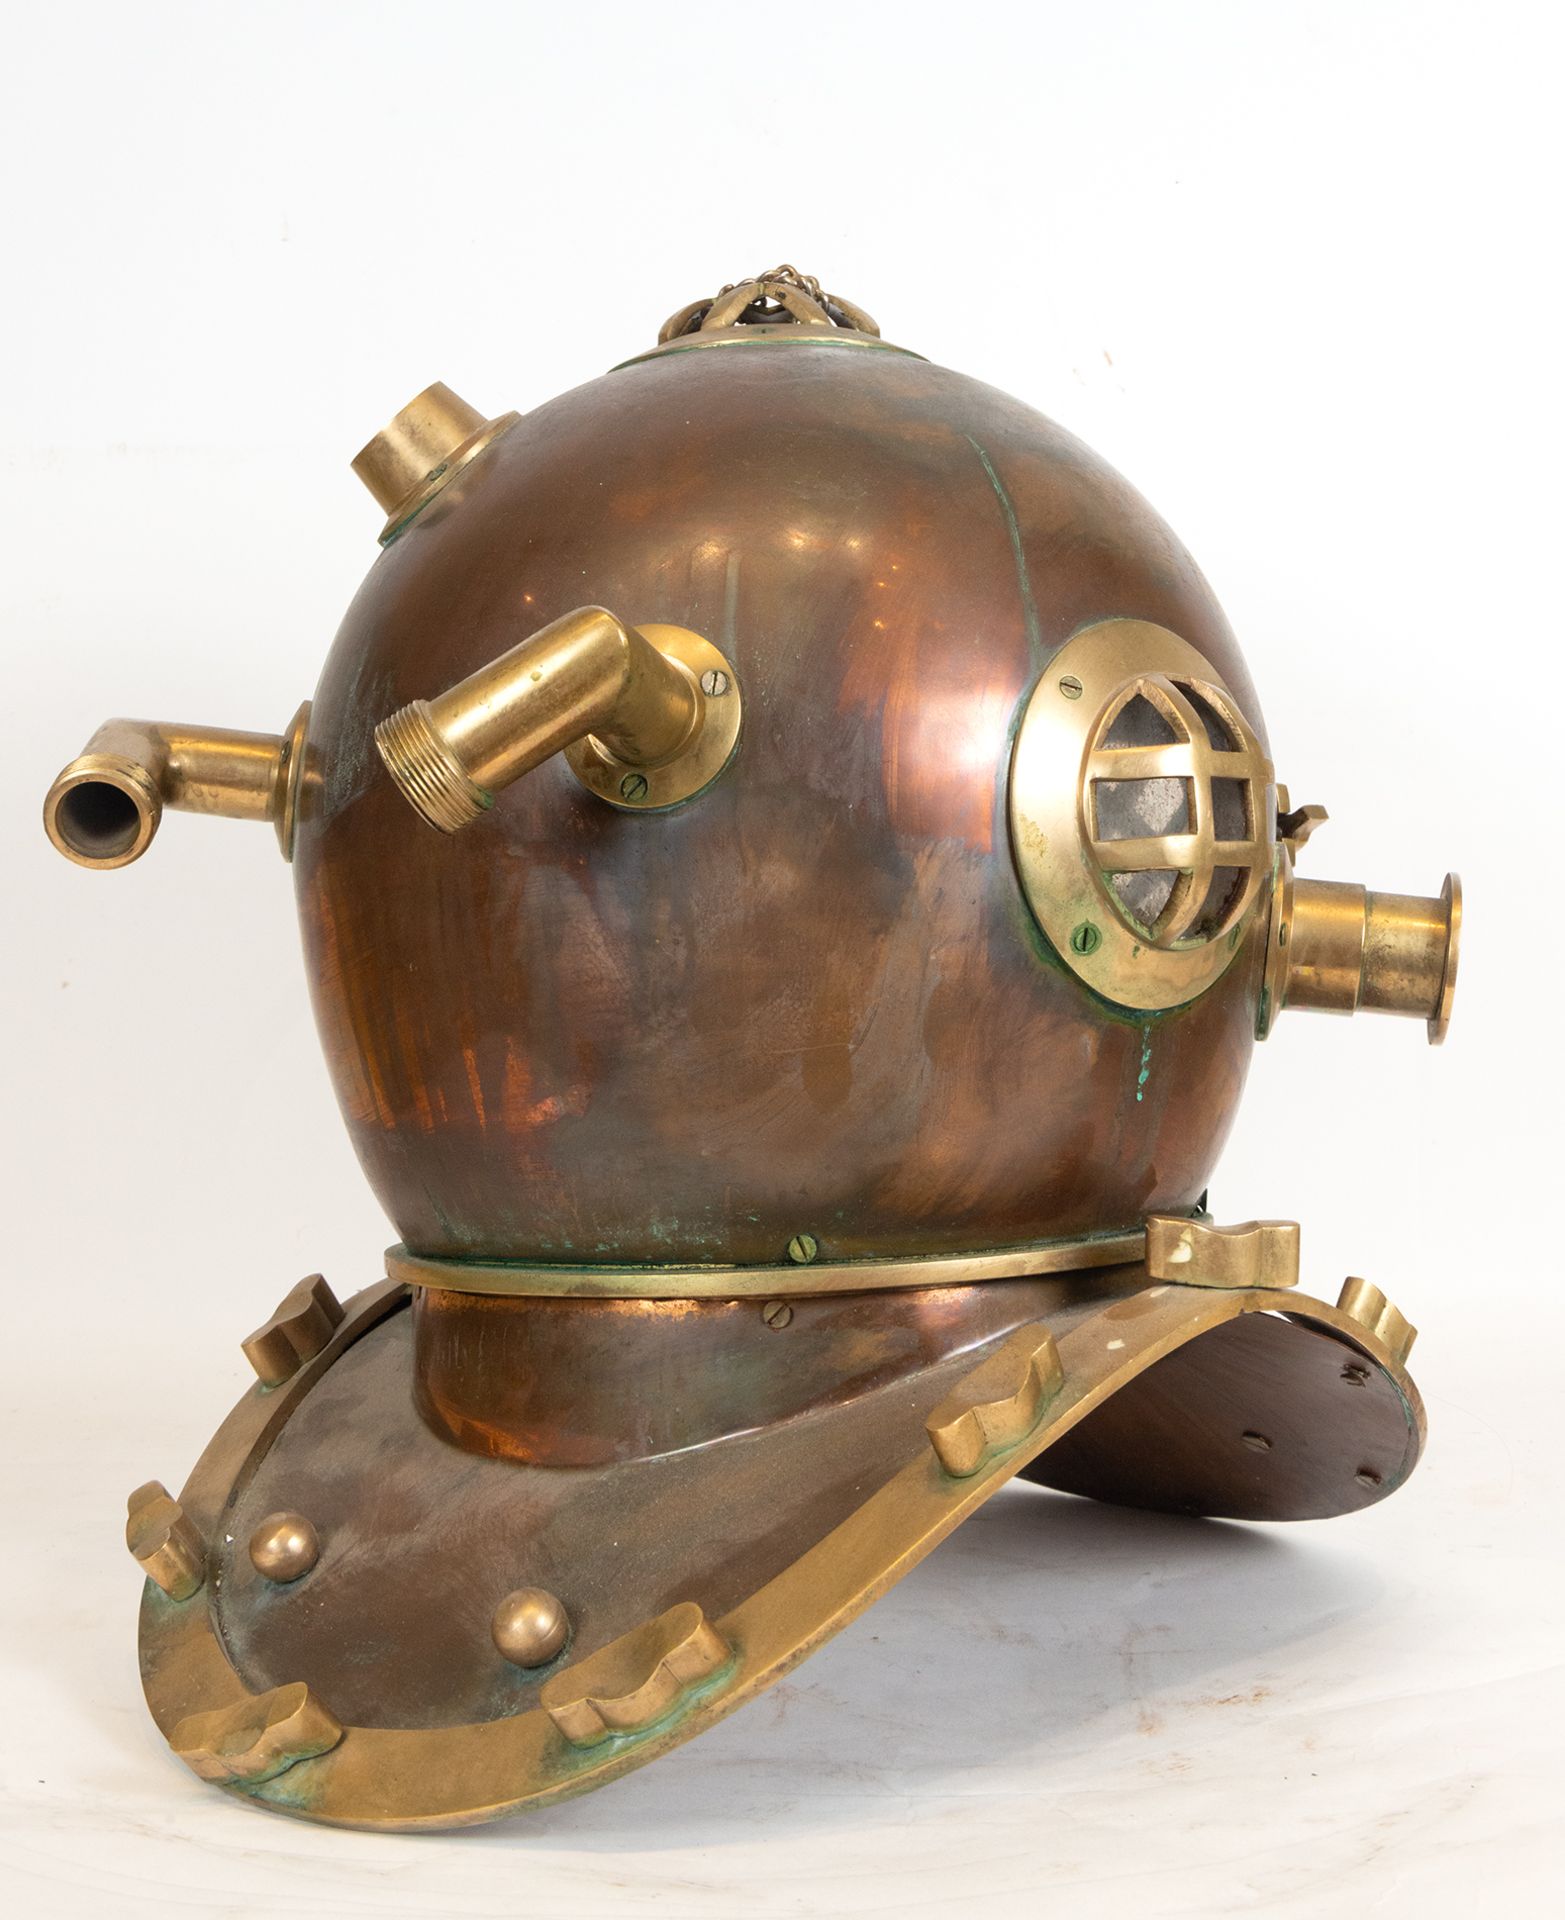 Rare Solid Bronze Diver's Helmet, Italy or England, late 19th century - early 20th century - Image 4 of 5